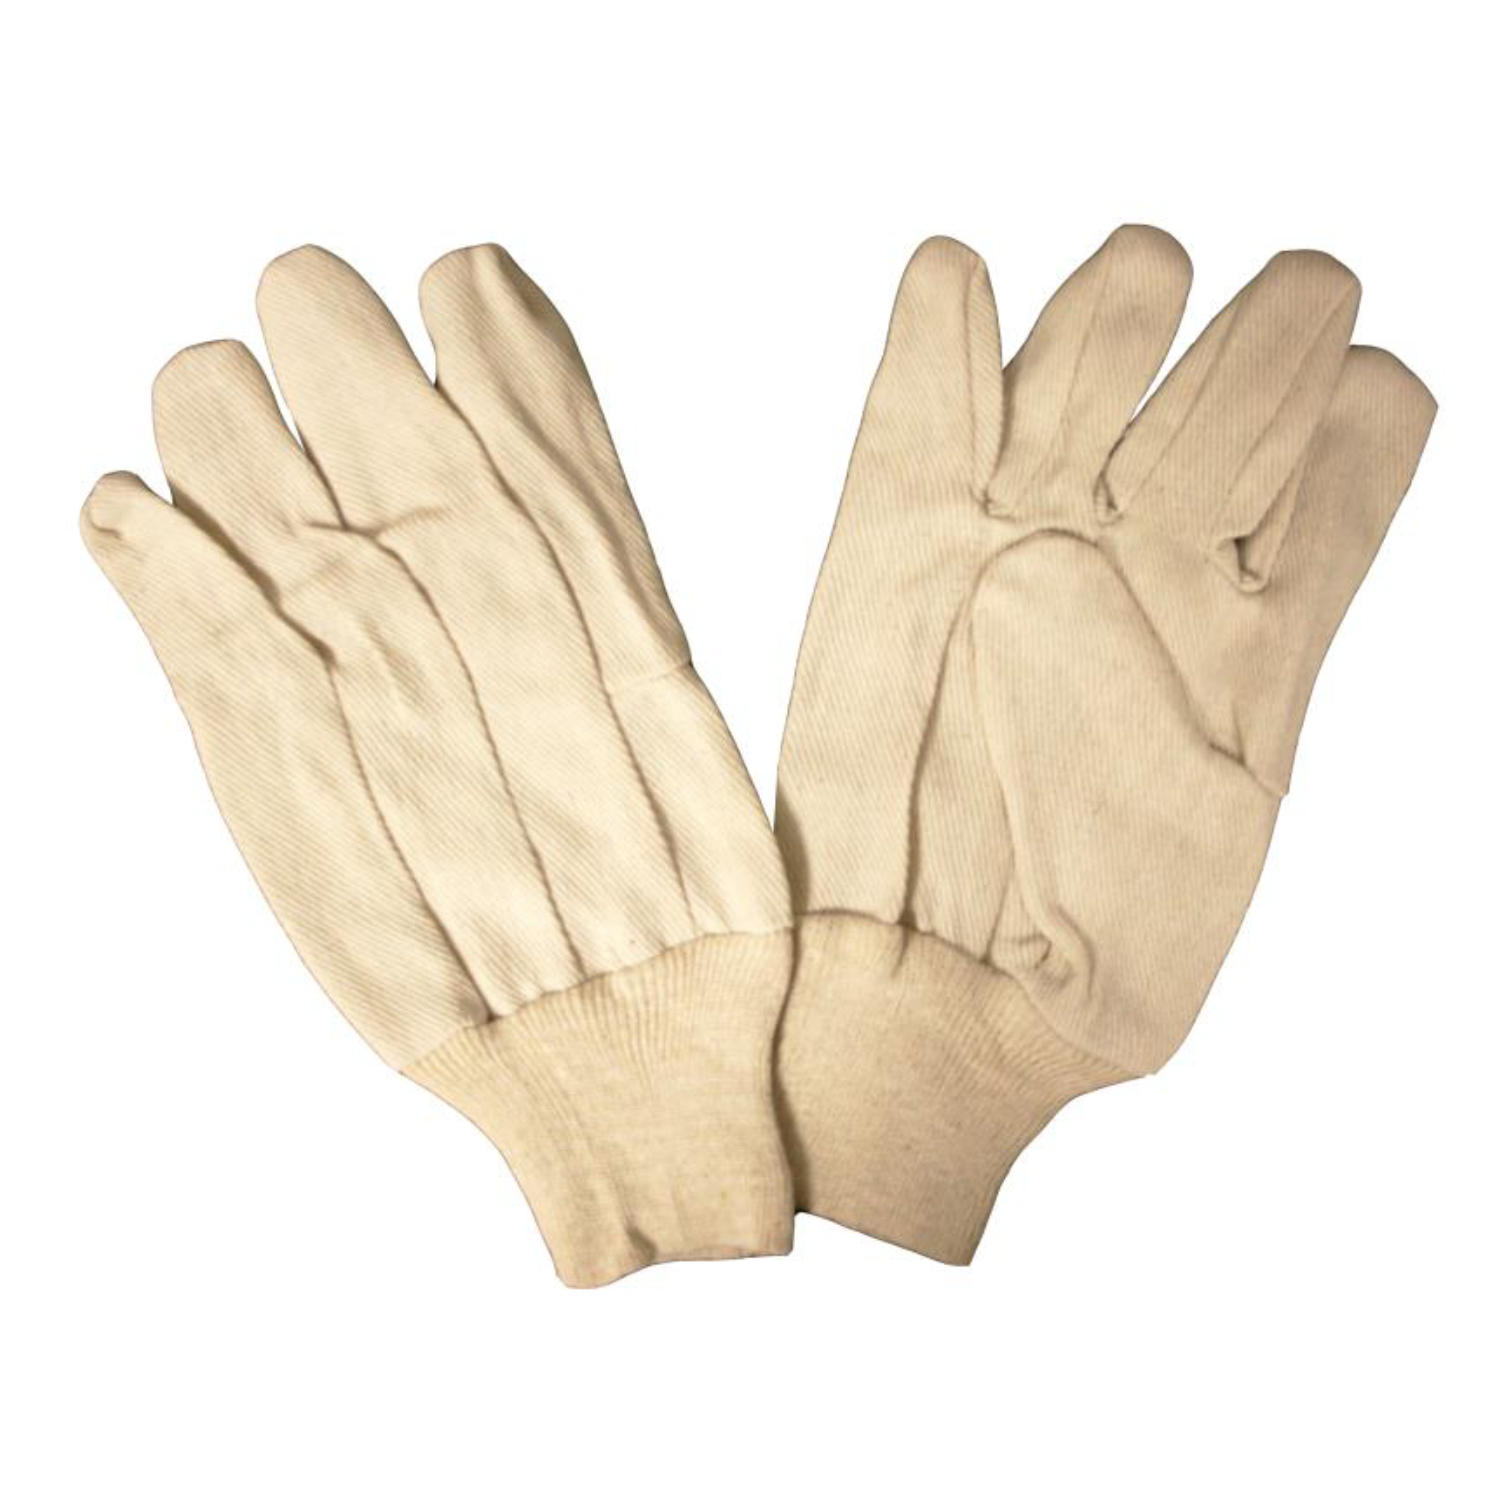 Premium, 8-ounce, Polyester/Cotton Canvas Gloves, Clute Cut, Wing Thumb, Knit Wrist #2000RW1 (sold by the dozen)